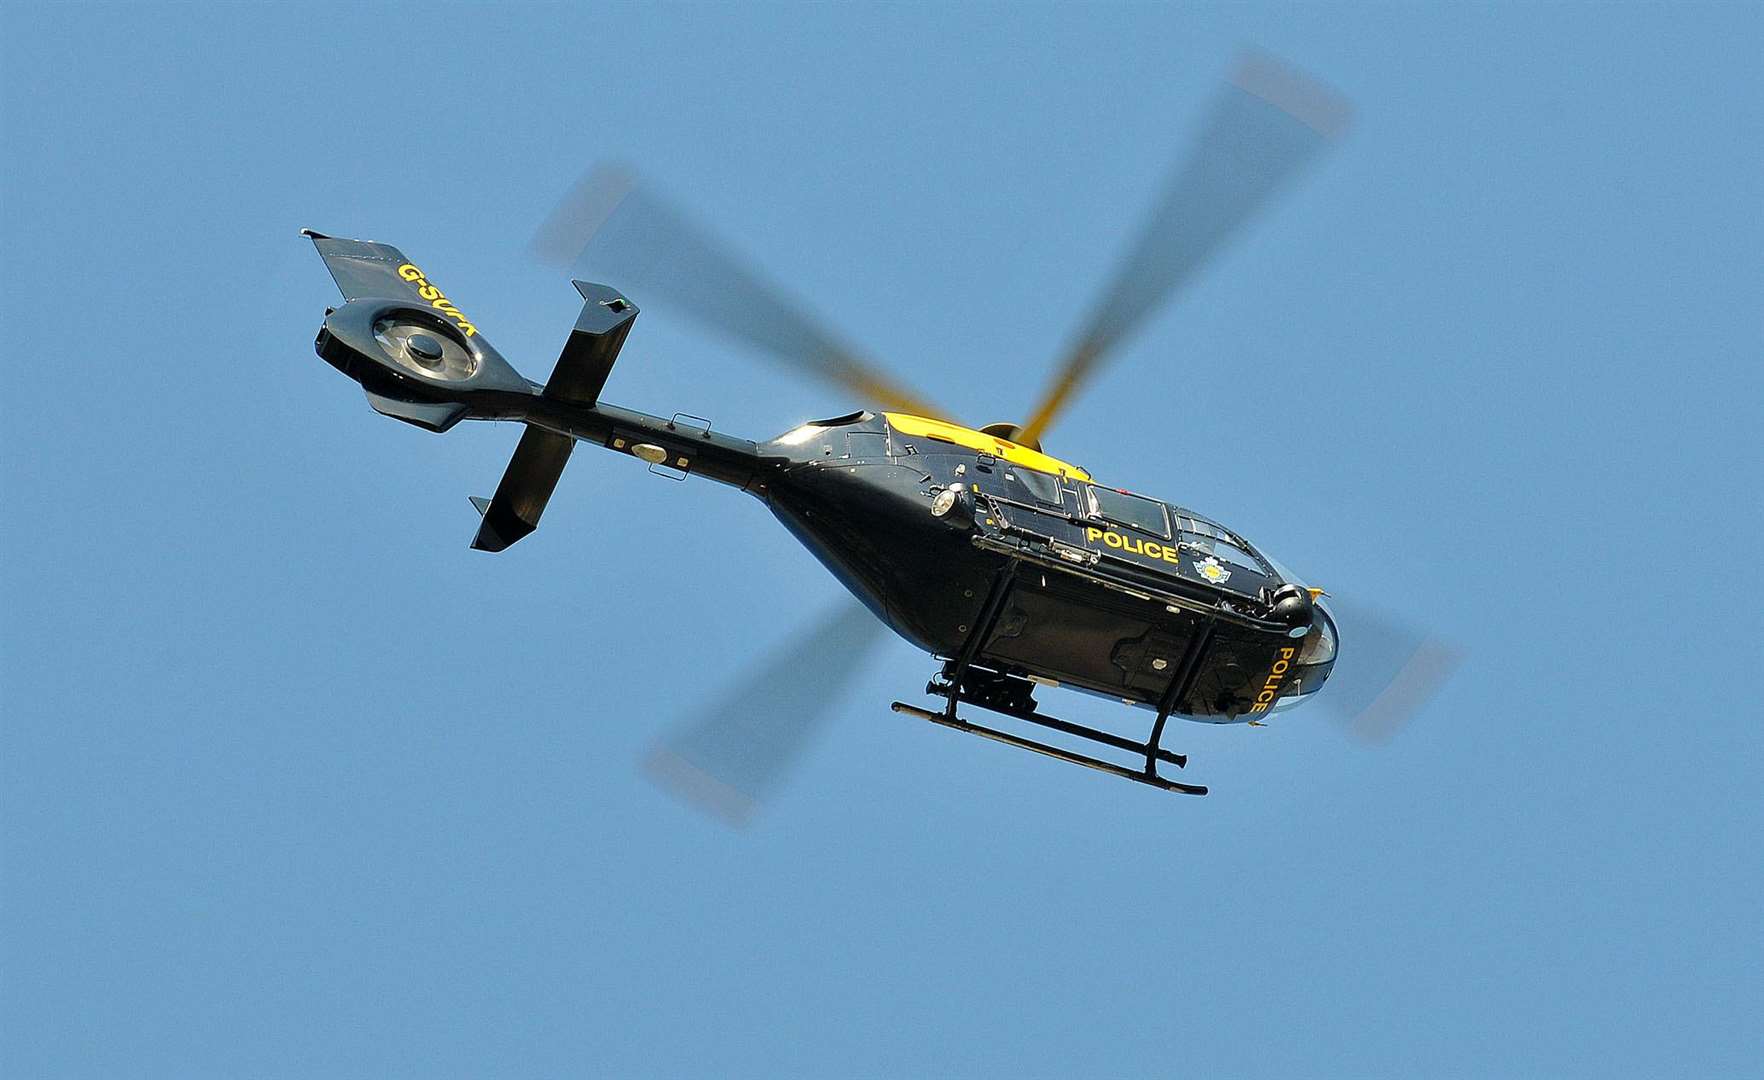 Police Helicopter stock image (7071463)